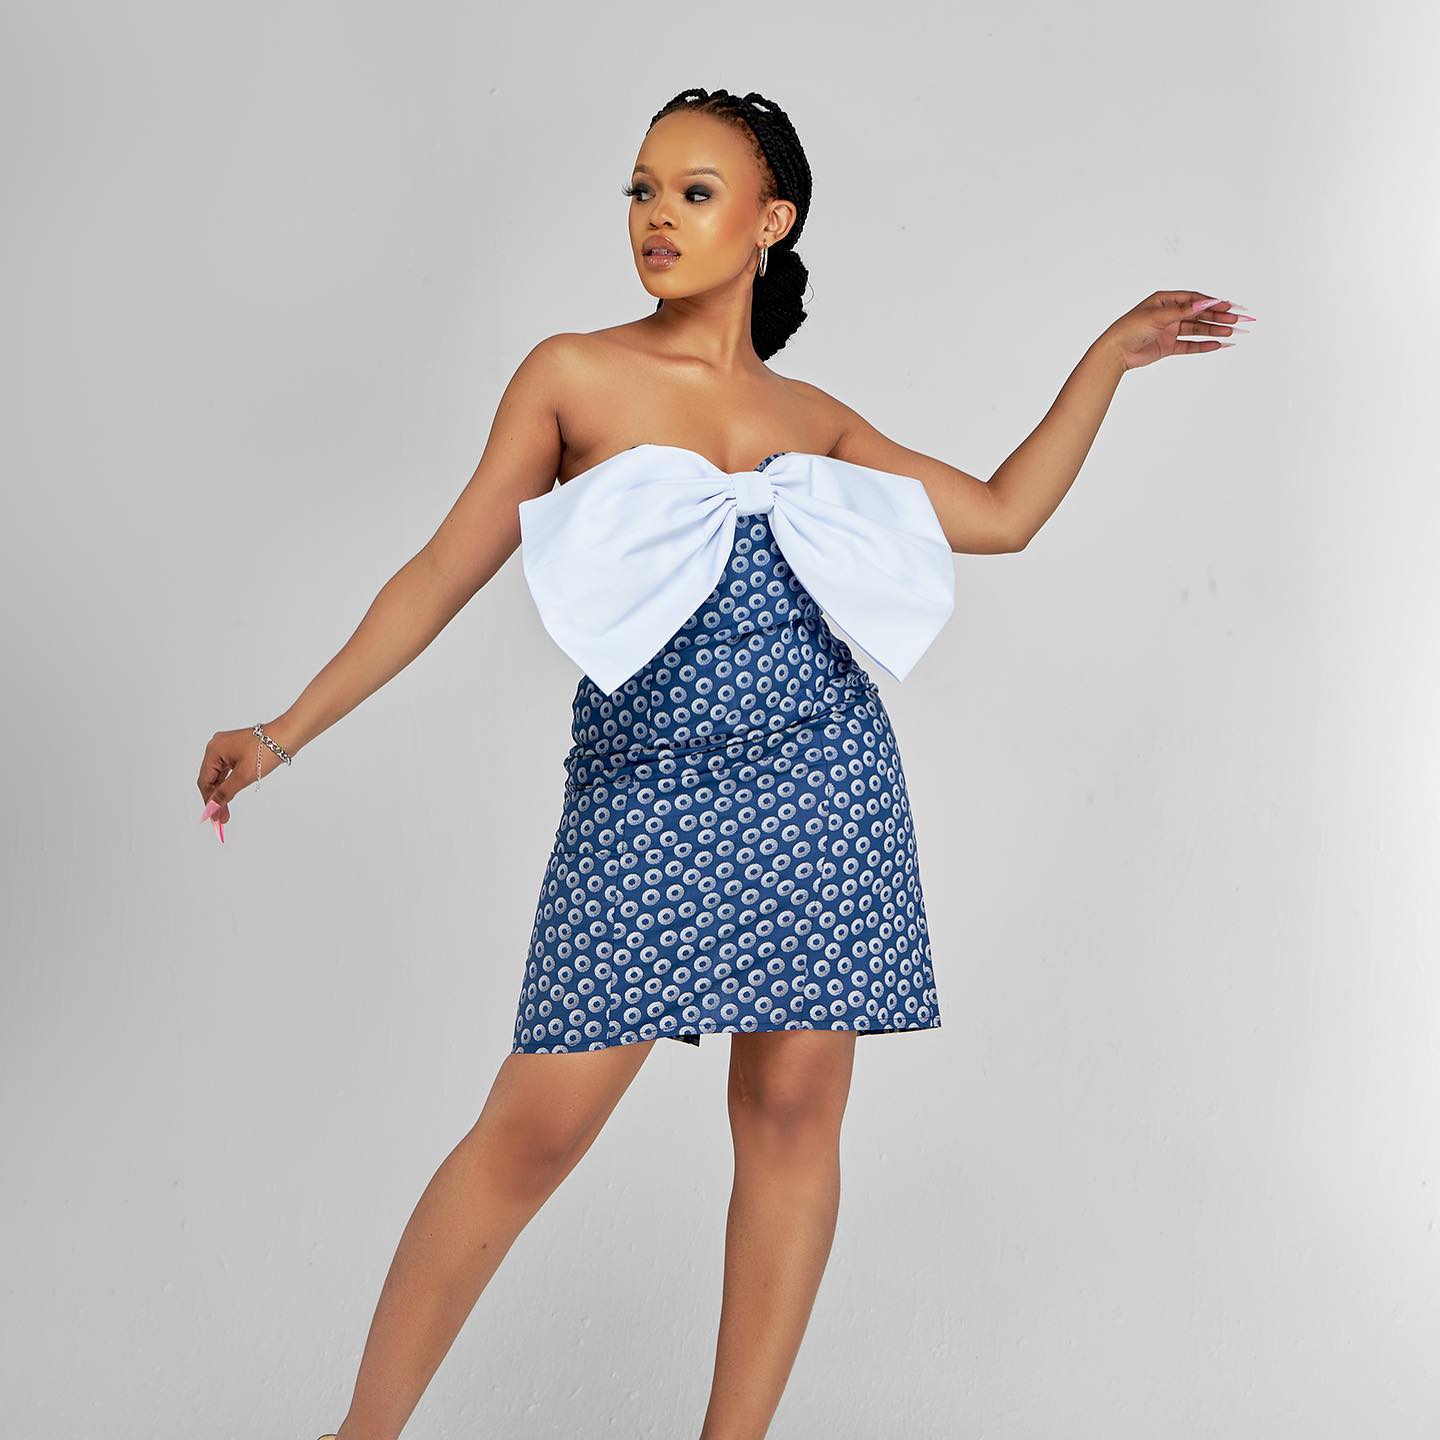 Tswana Traditional Dresses: Exploring the Artistic Techniques and Materials Used 28